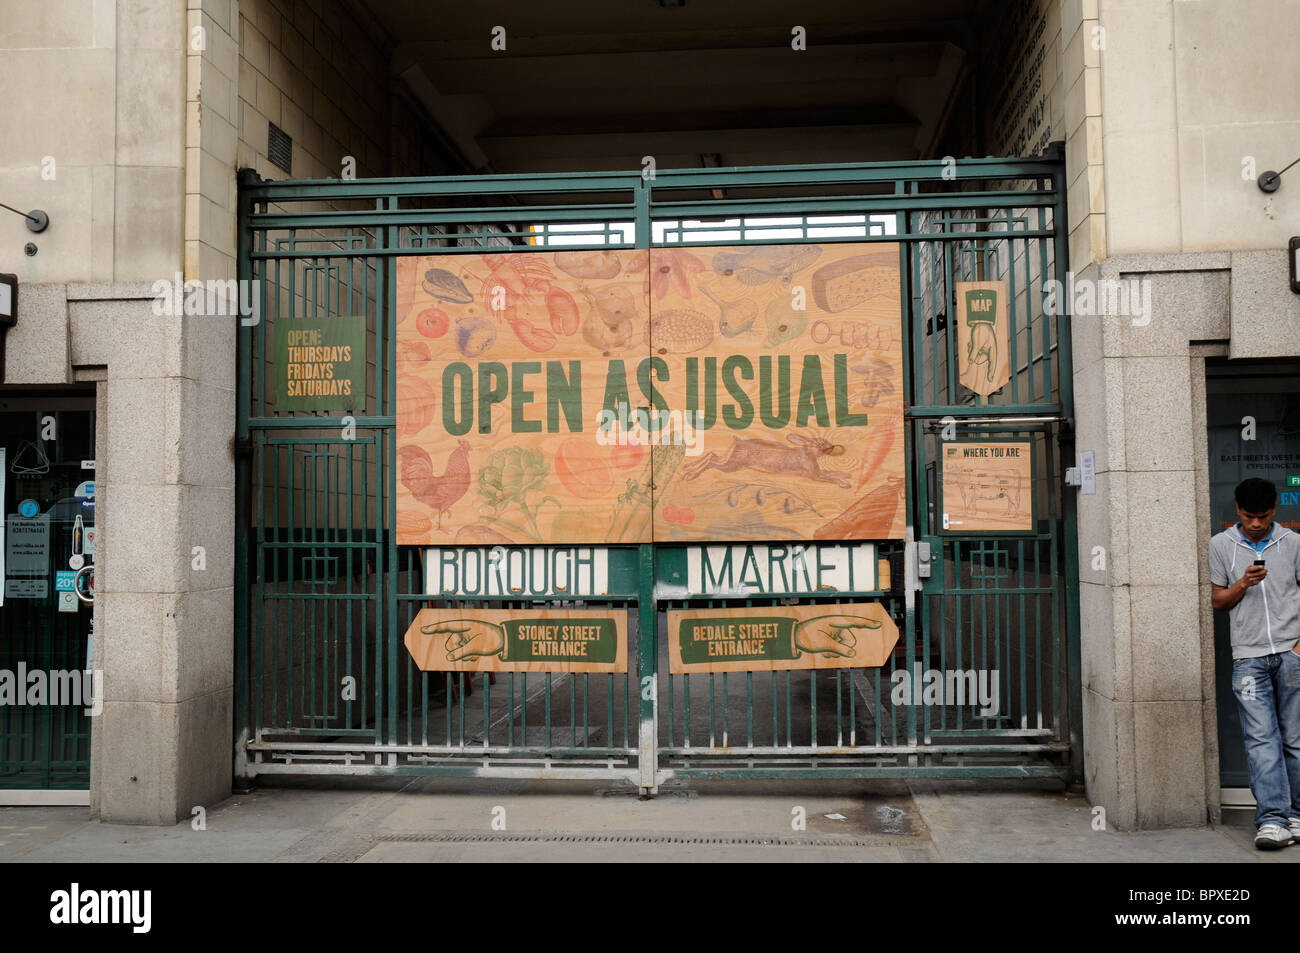 Open As Usual sign on main entrance of the Borough Market, SE1, London Stock Photo